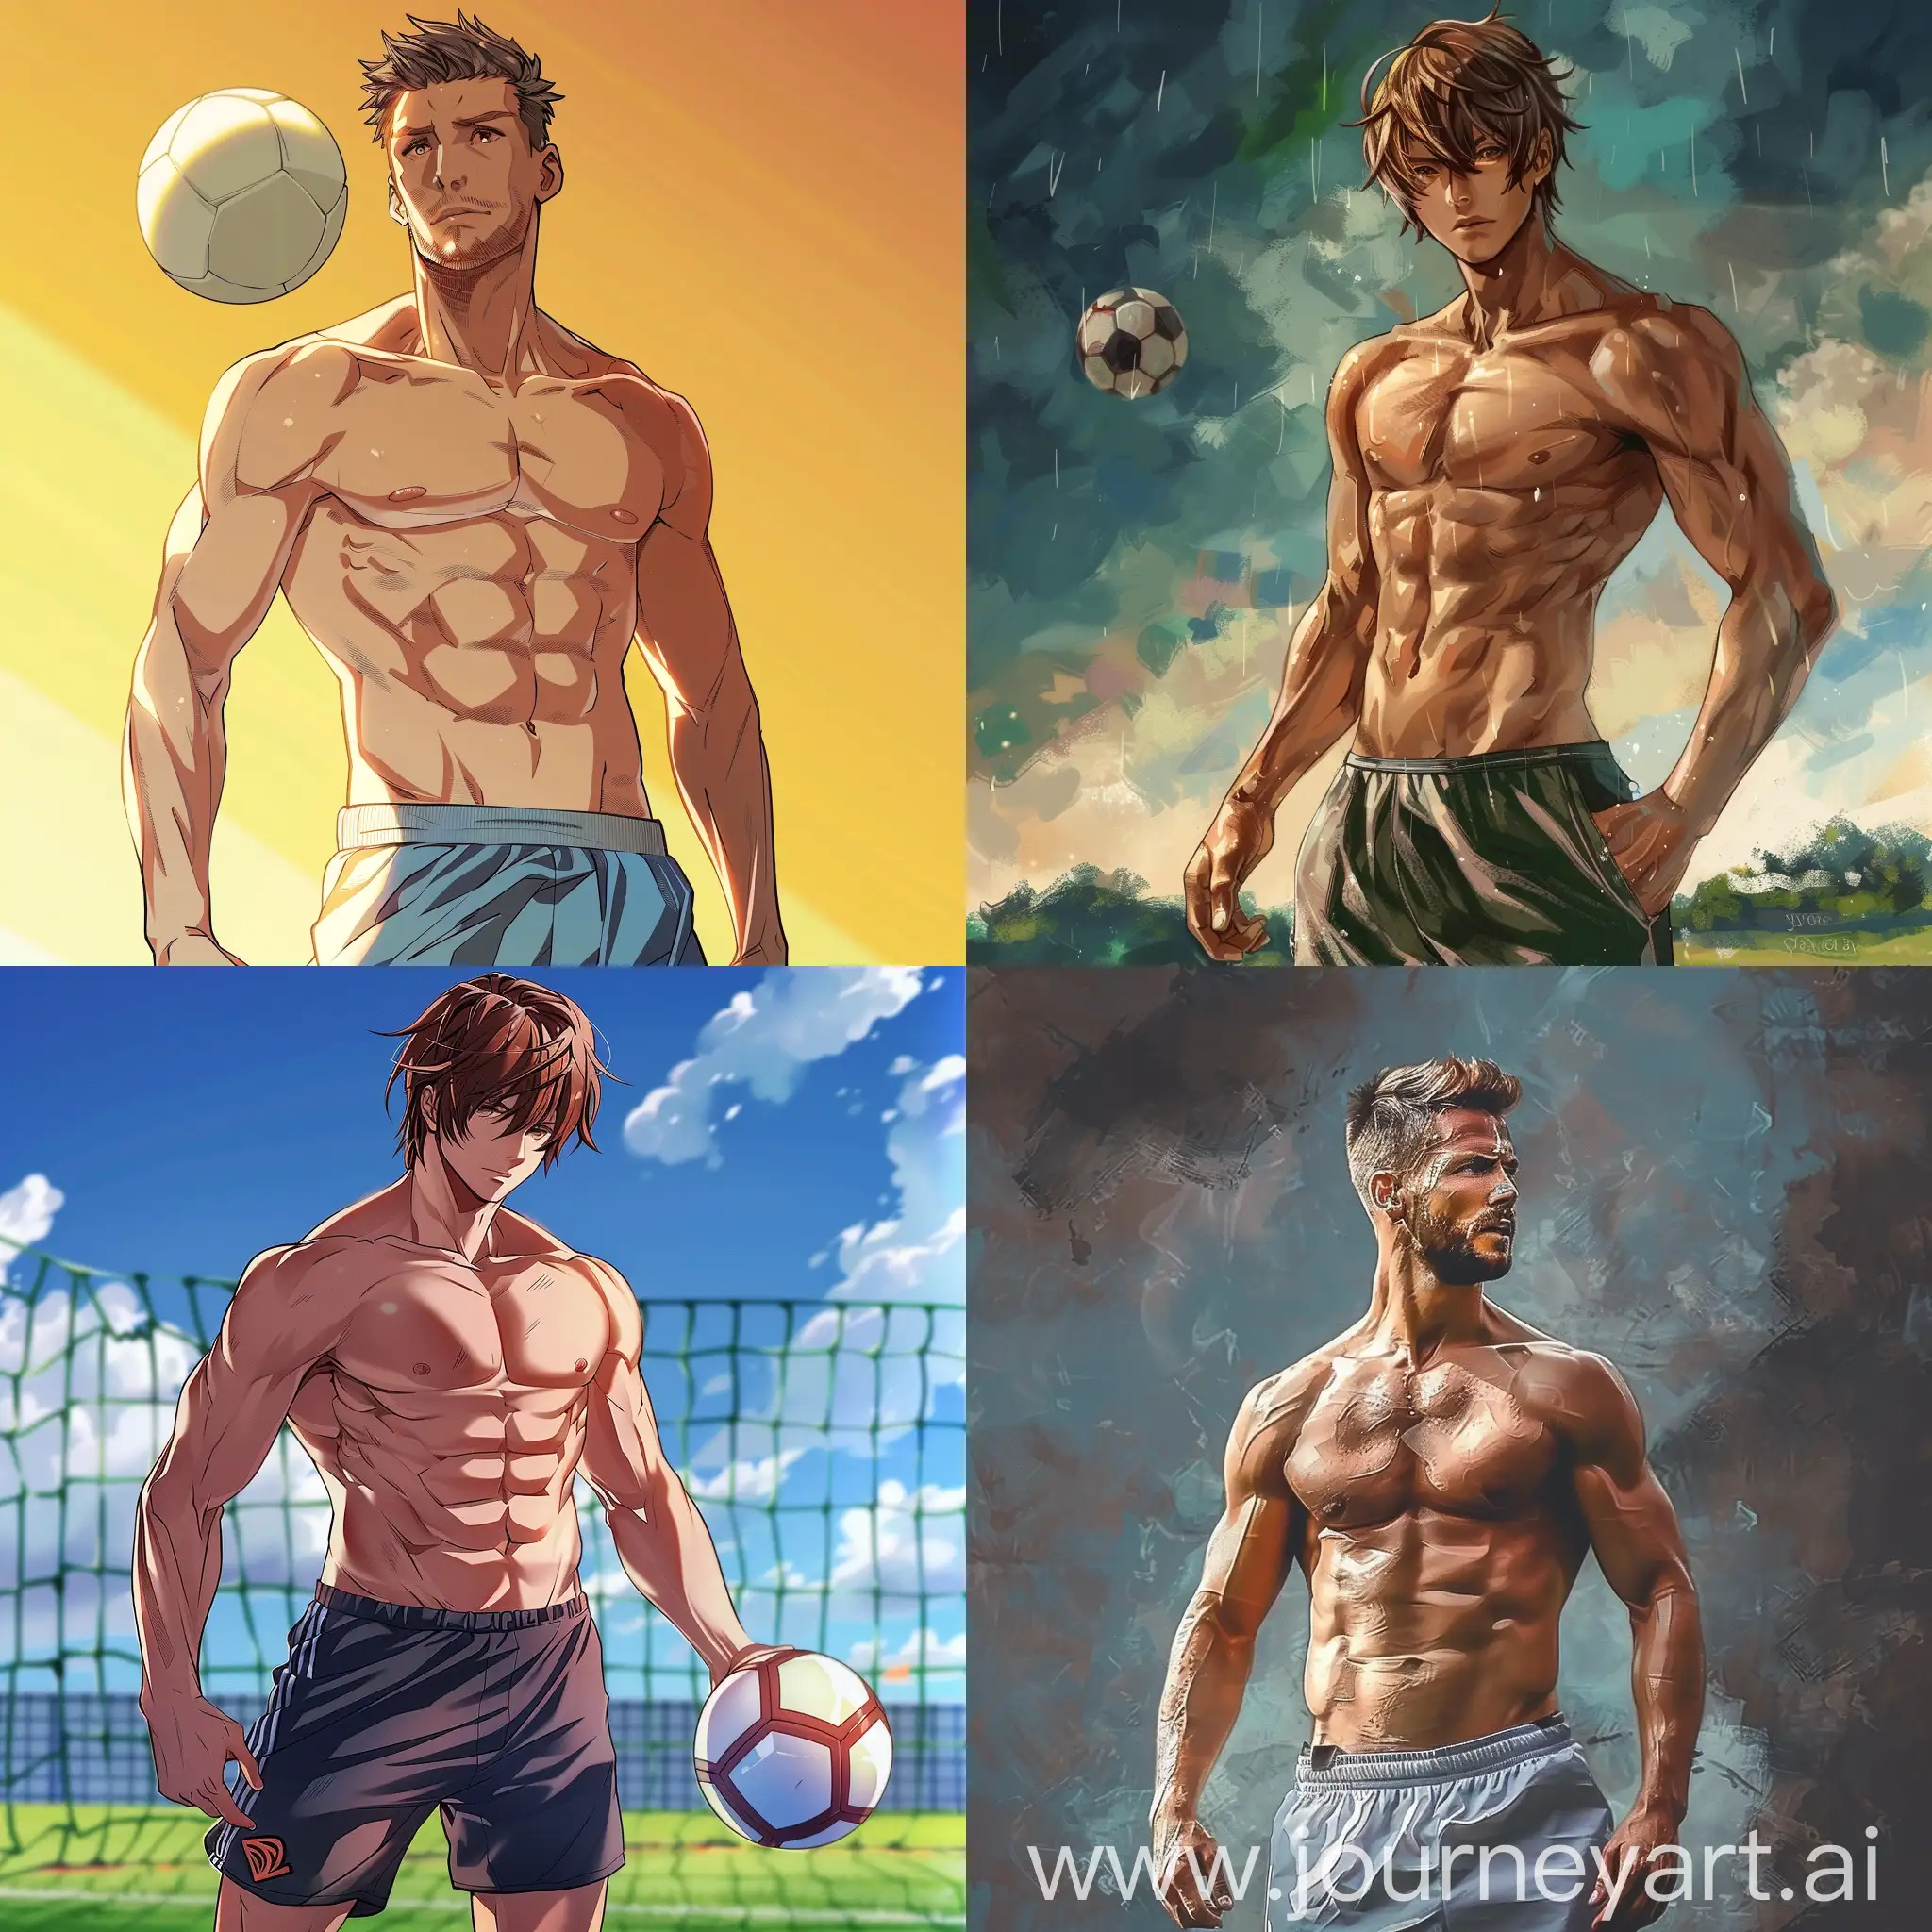 Shirtless muscular male soccer player in an anime style